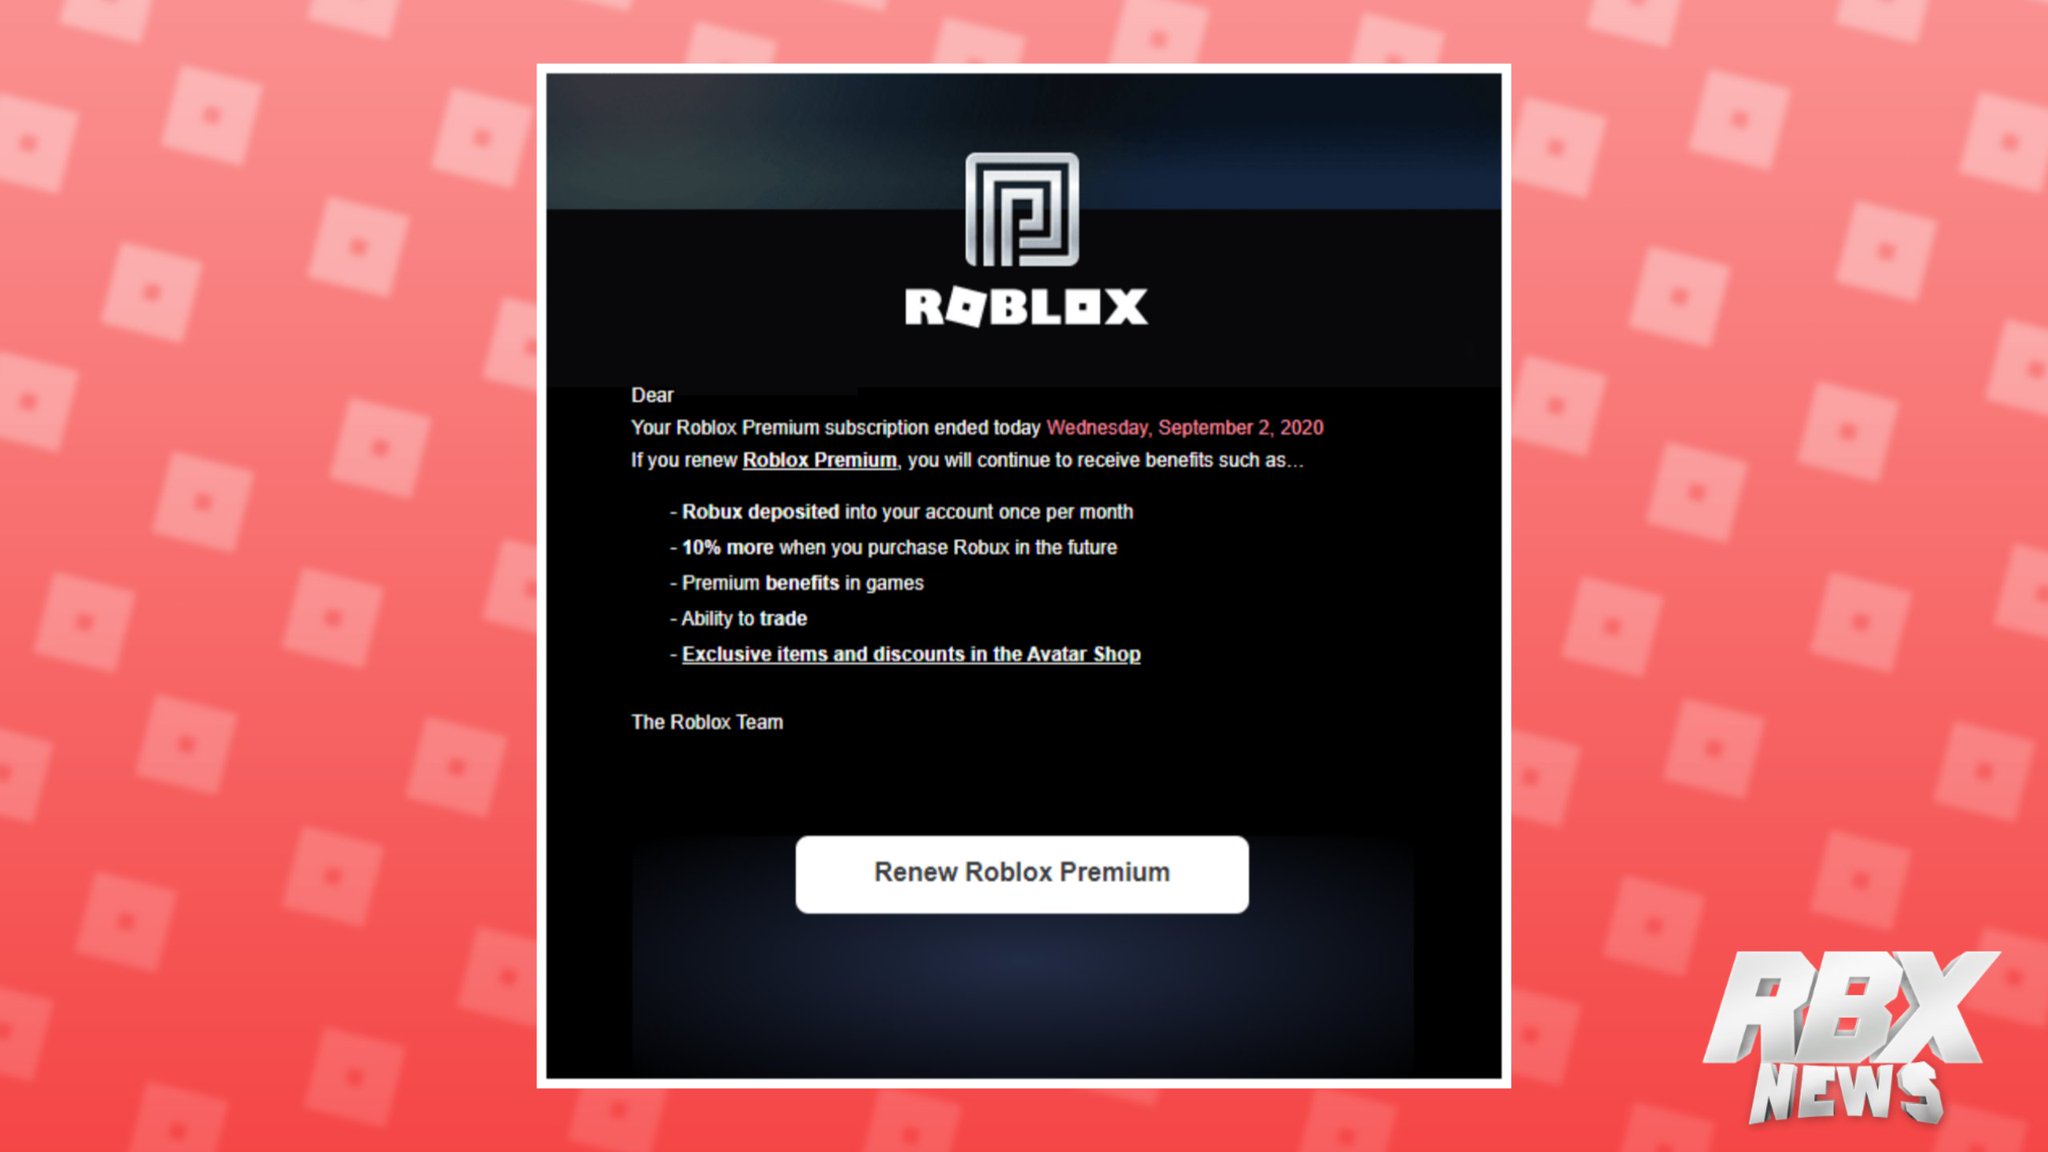 Rbxnews On Twitter Alongside A New Roblox Premium Page Https T Co Riuzj4vvl4 It Appears That Roblox Has Updated The Premium Cancellation Email Image Via Kensizovoid Https T Co Apccchehr7 - roblox premium benefits